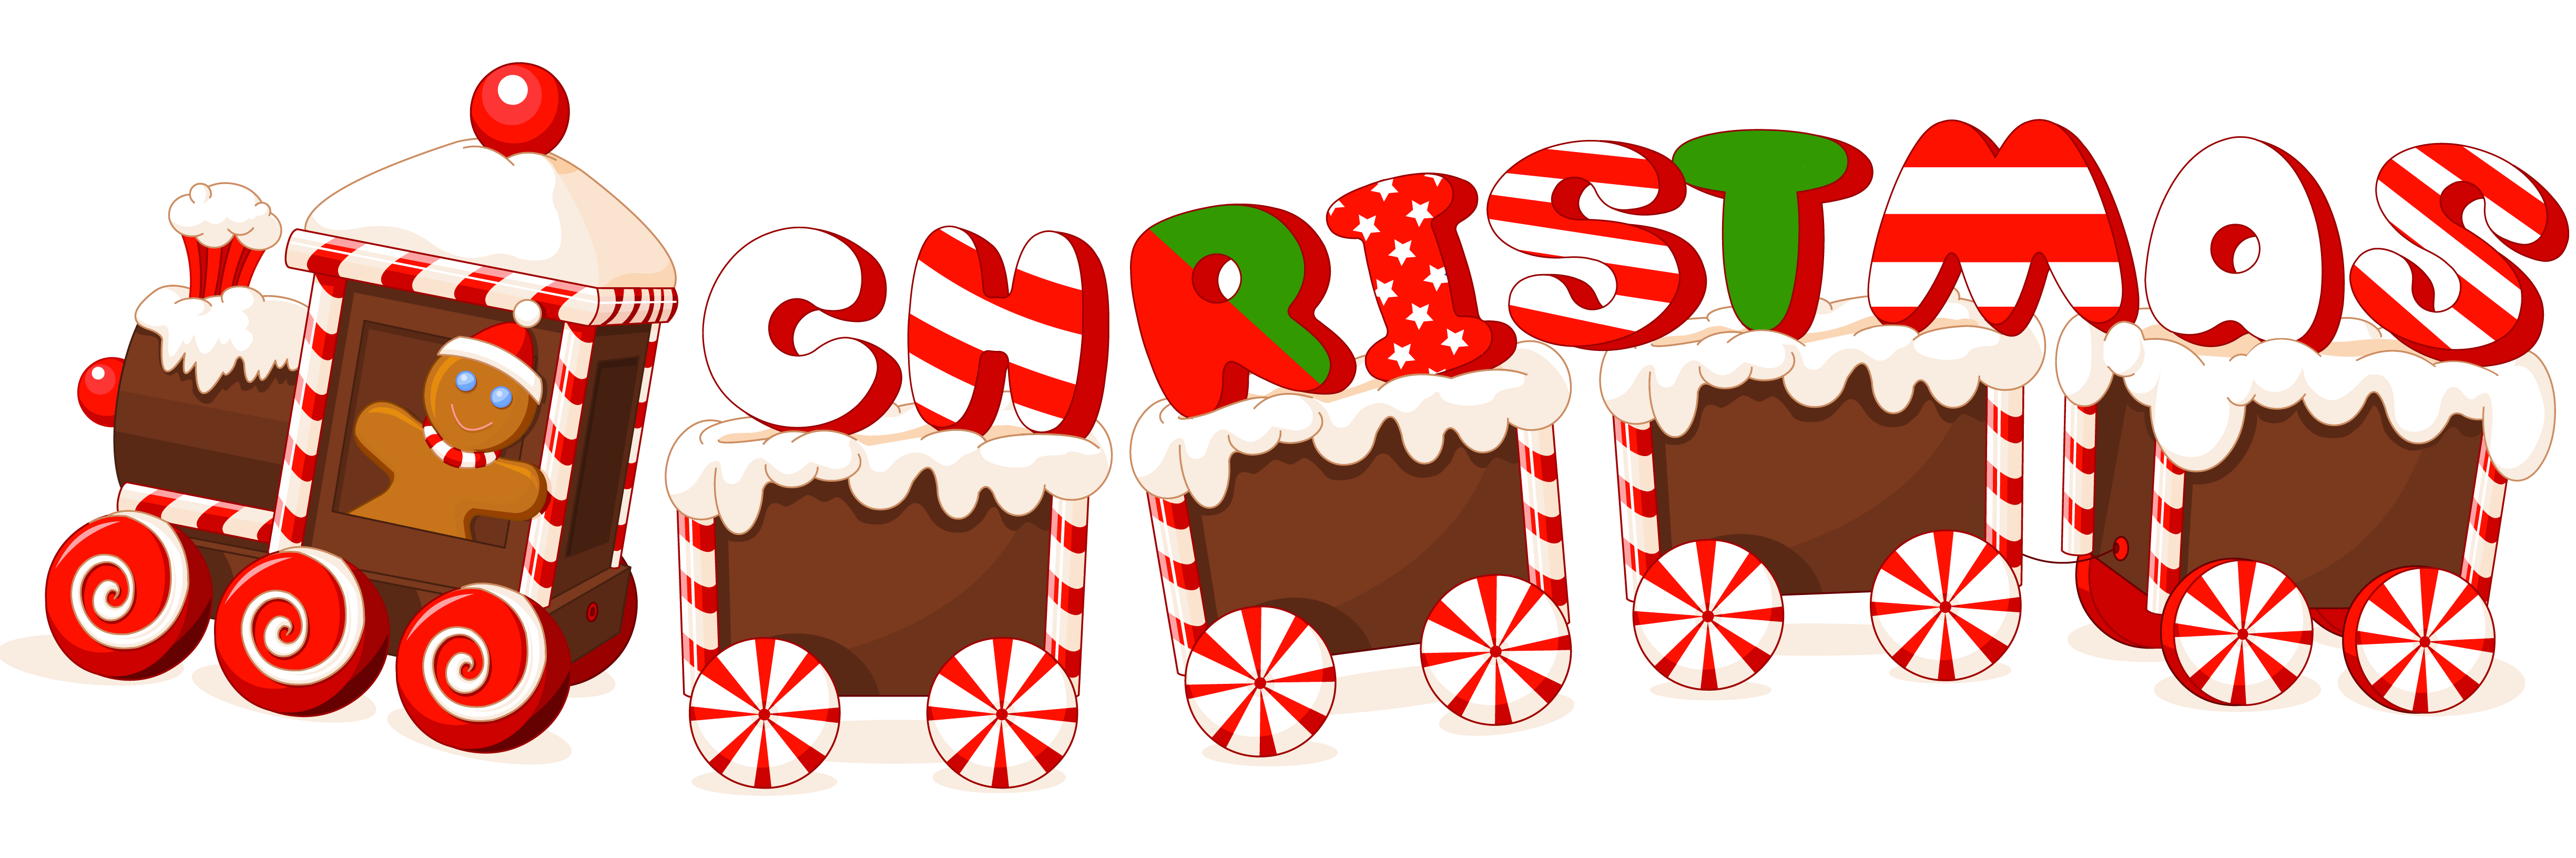 merry-christmas-png-14.png